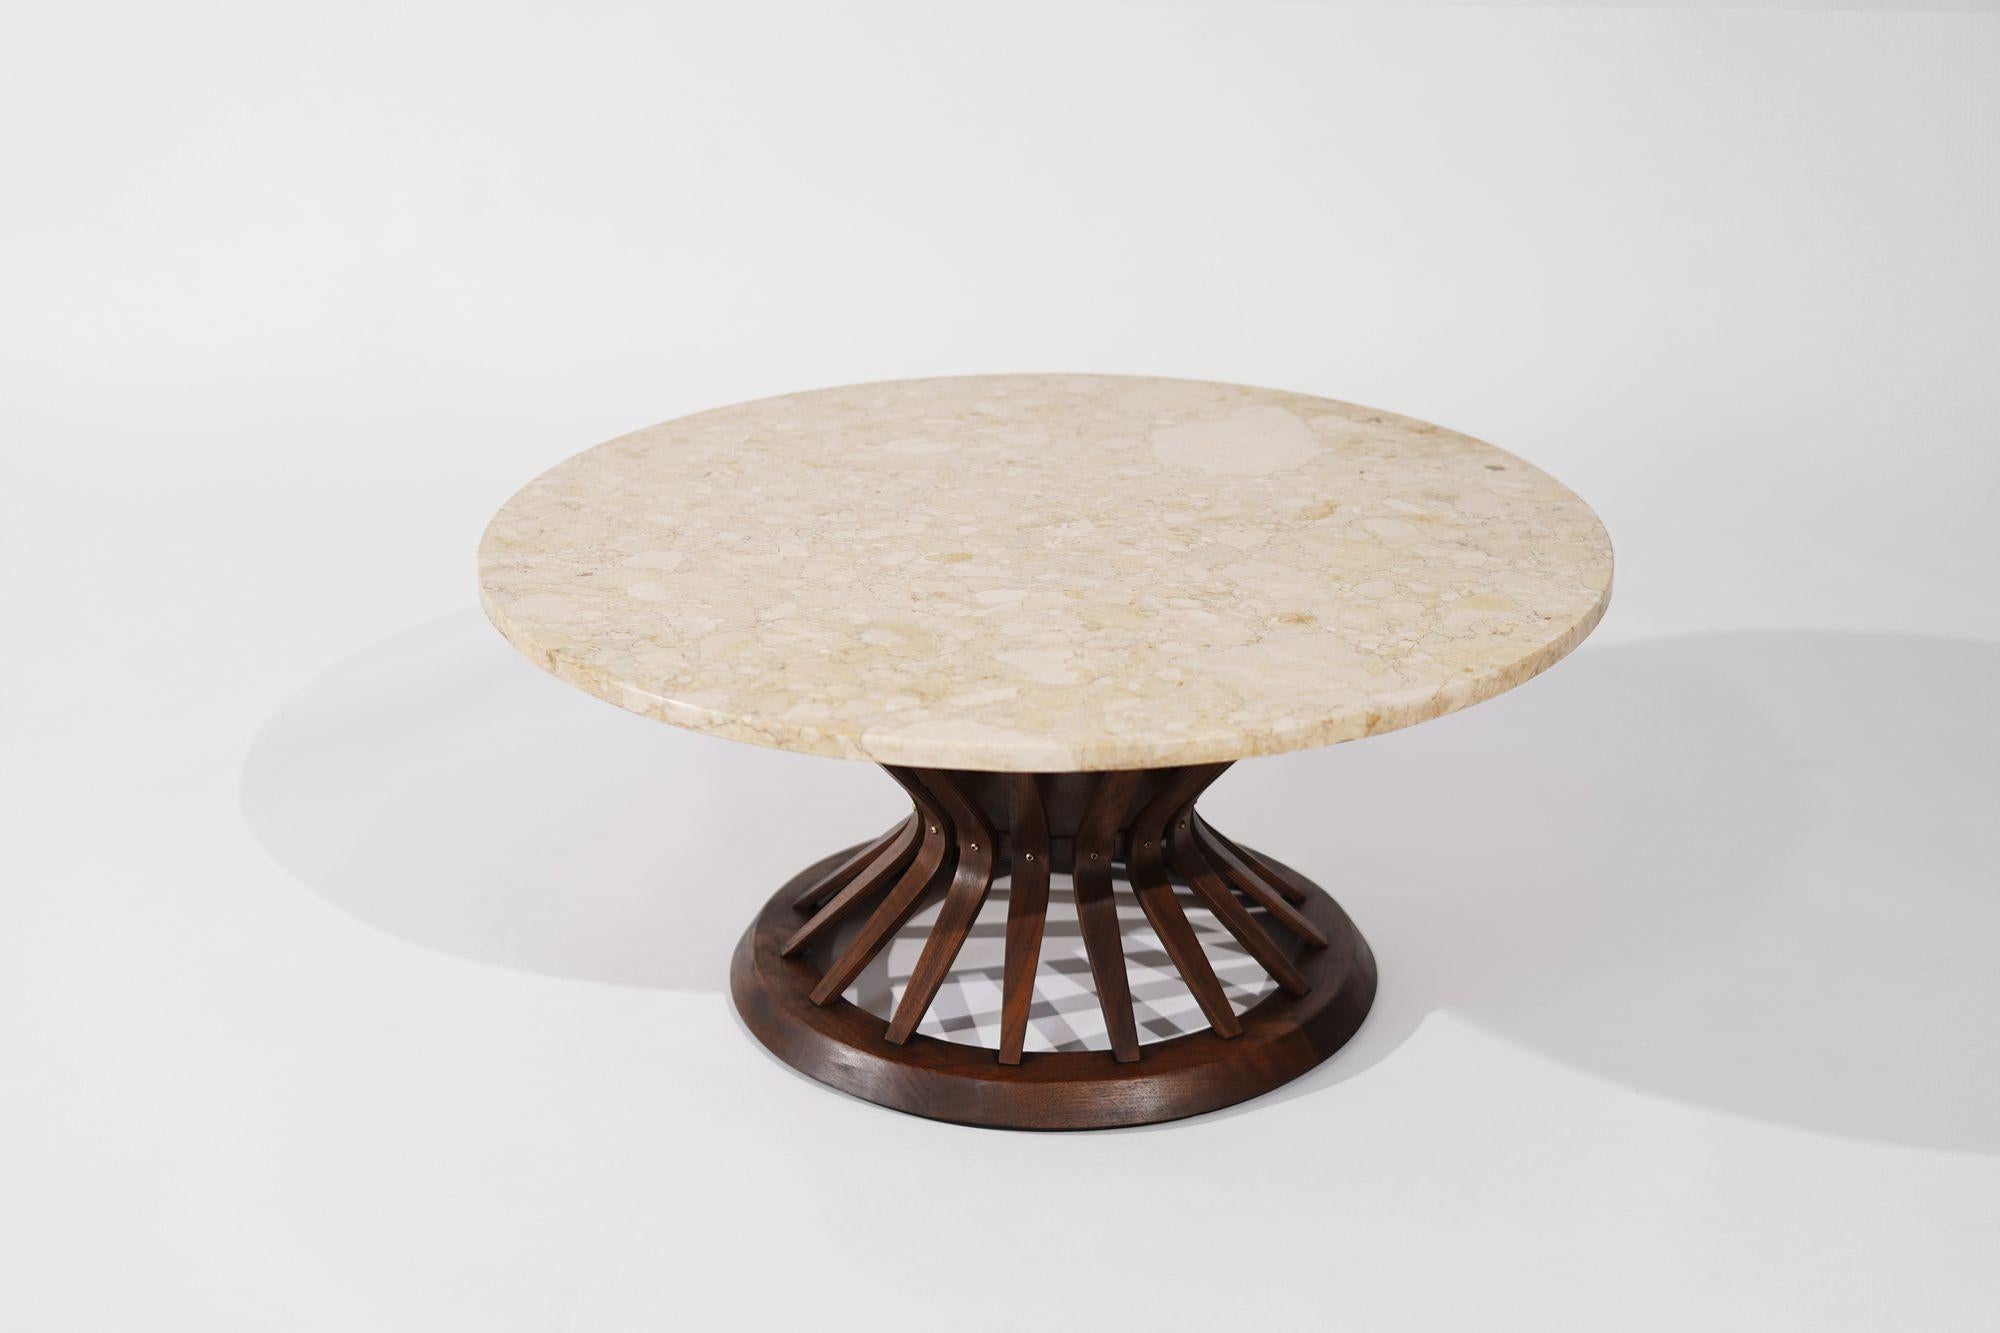 American Sheaf of Wheat Travertine Top Coffee Table by Edward Wormley, C. 1950s For Sale